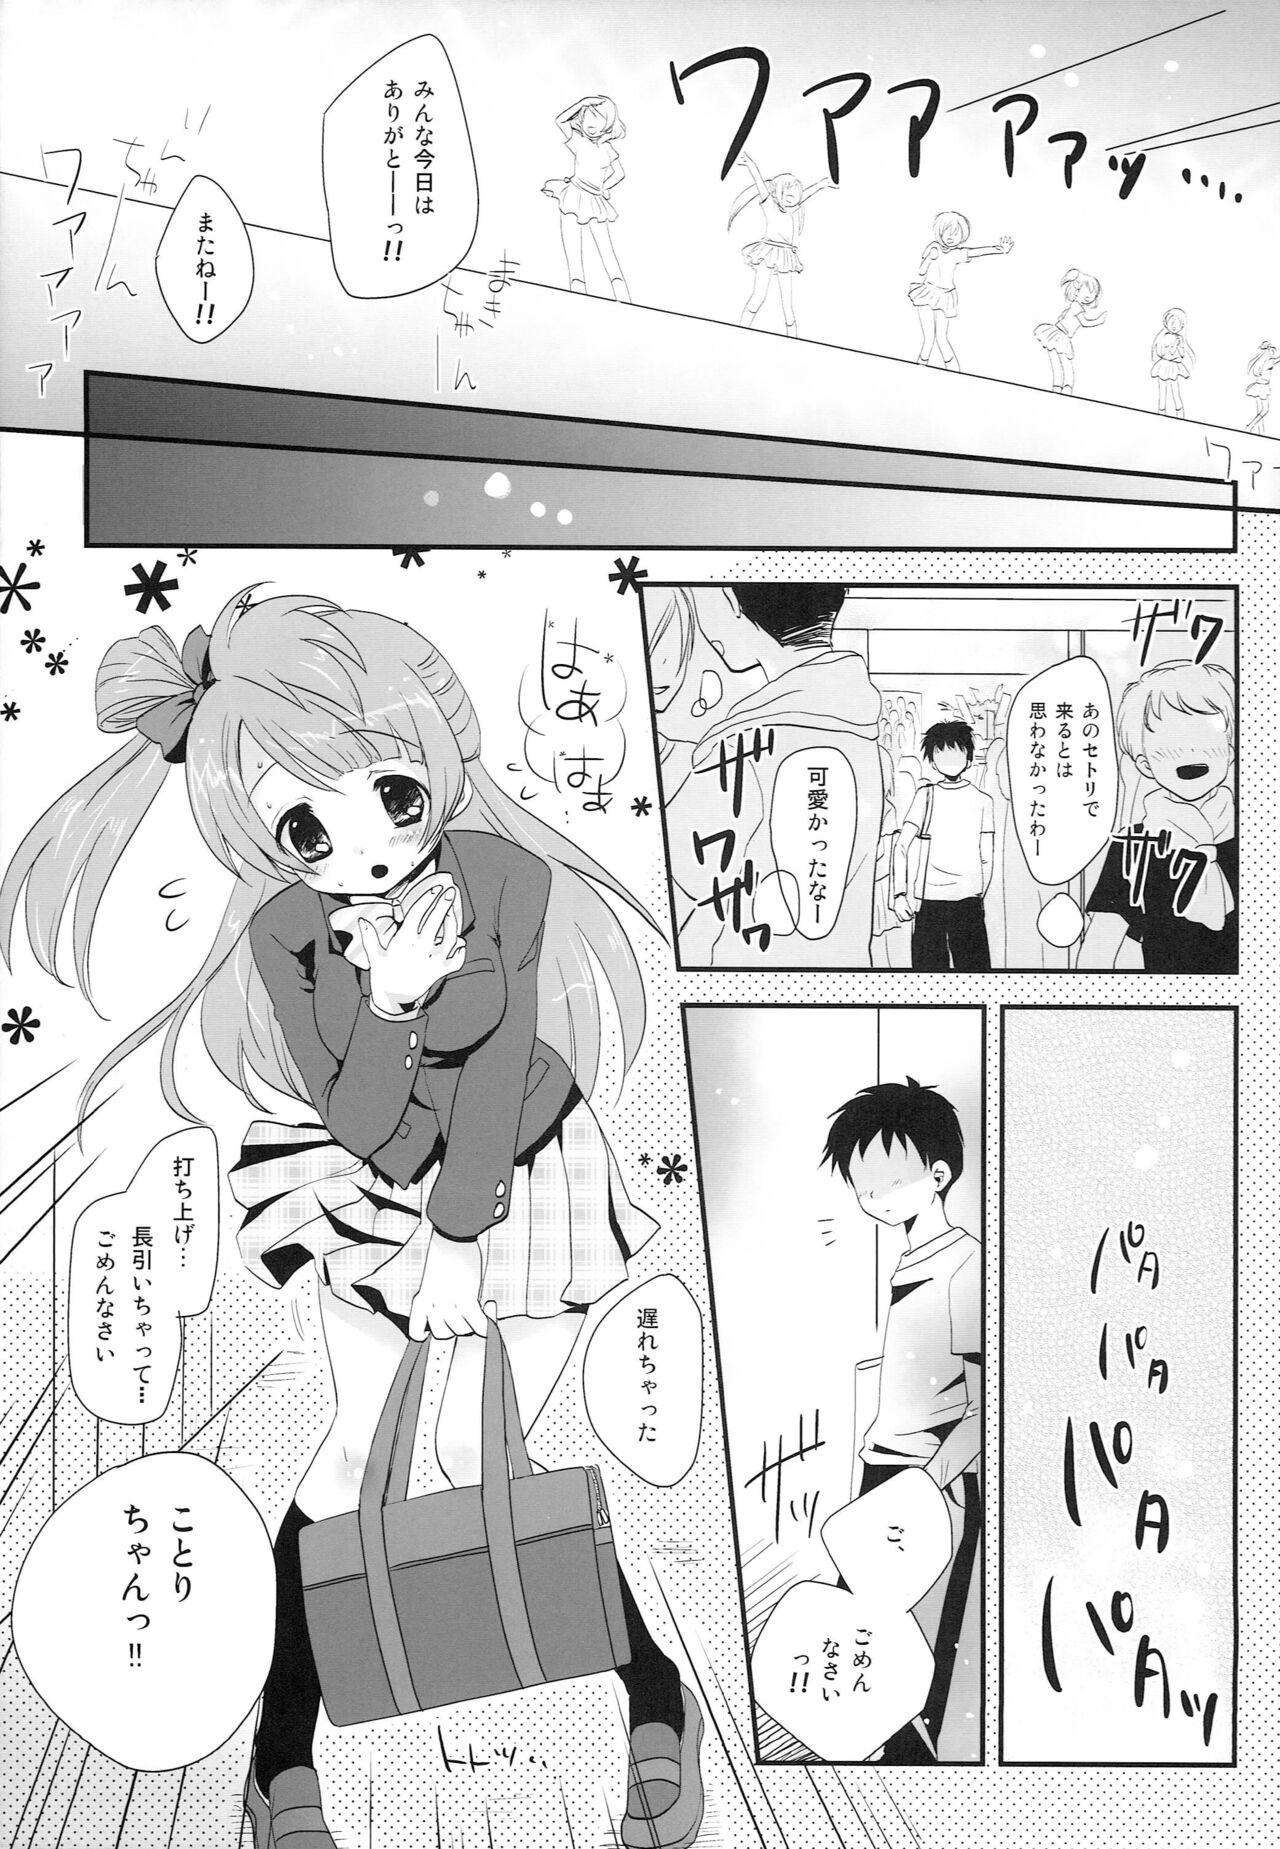 Party KOTORI DREAMING! - Love live Throat - Page 4